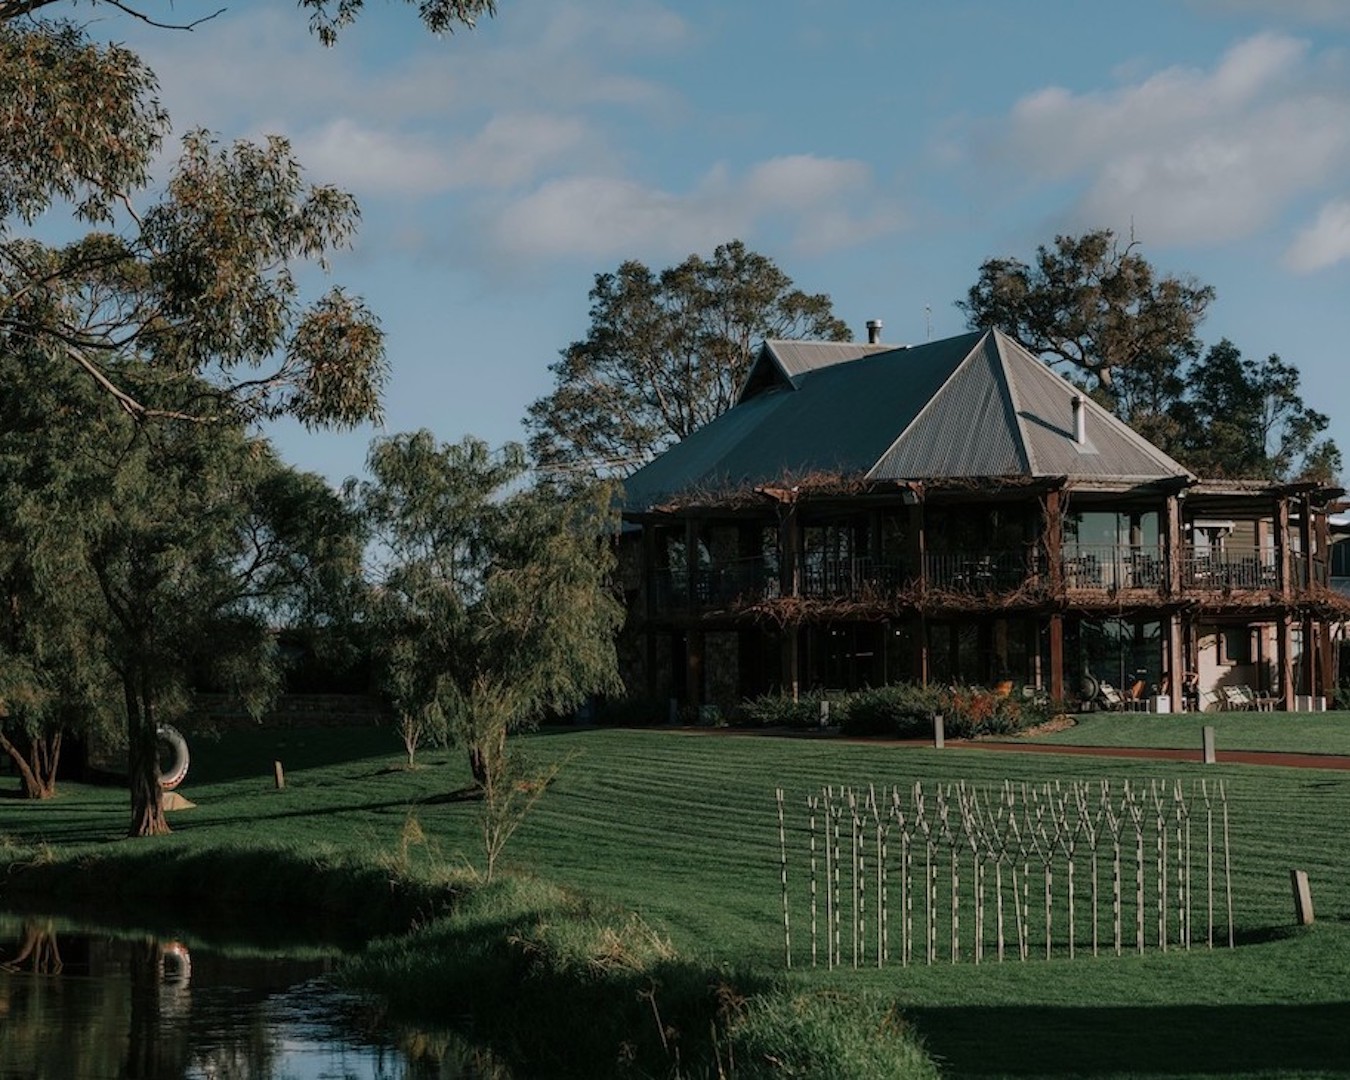 A lush winery in Margaret River, with grass, trees and vines surrounding a picturesque building